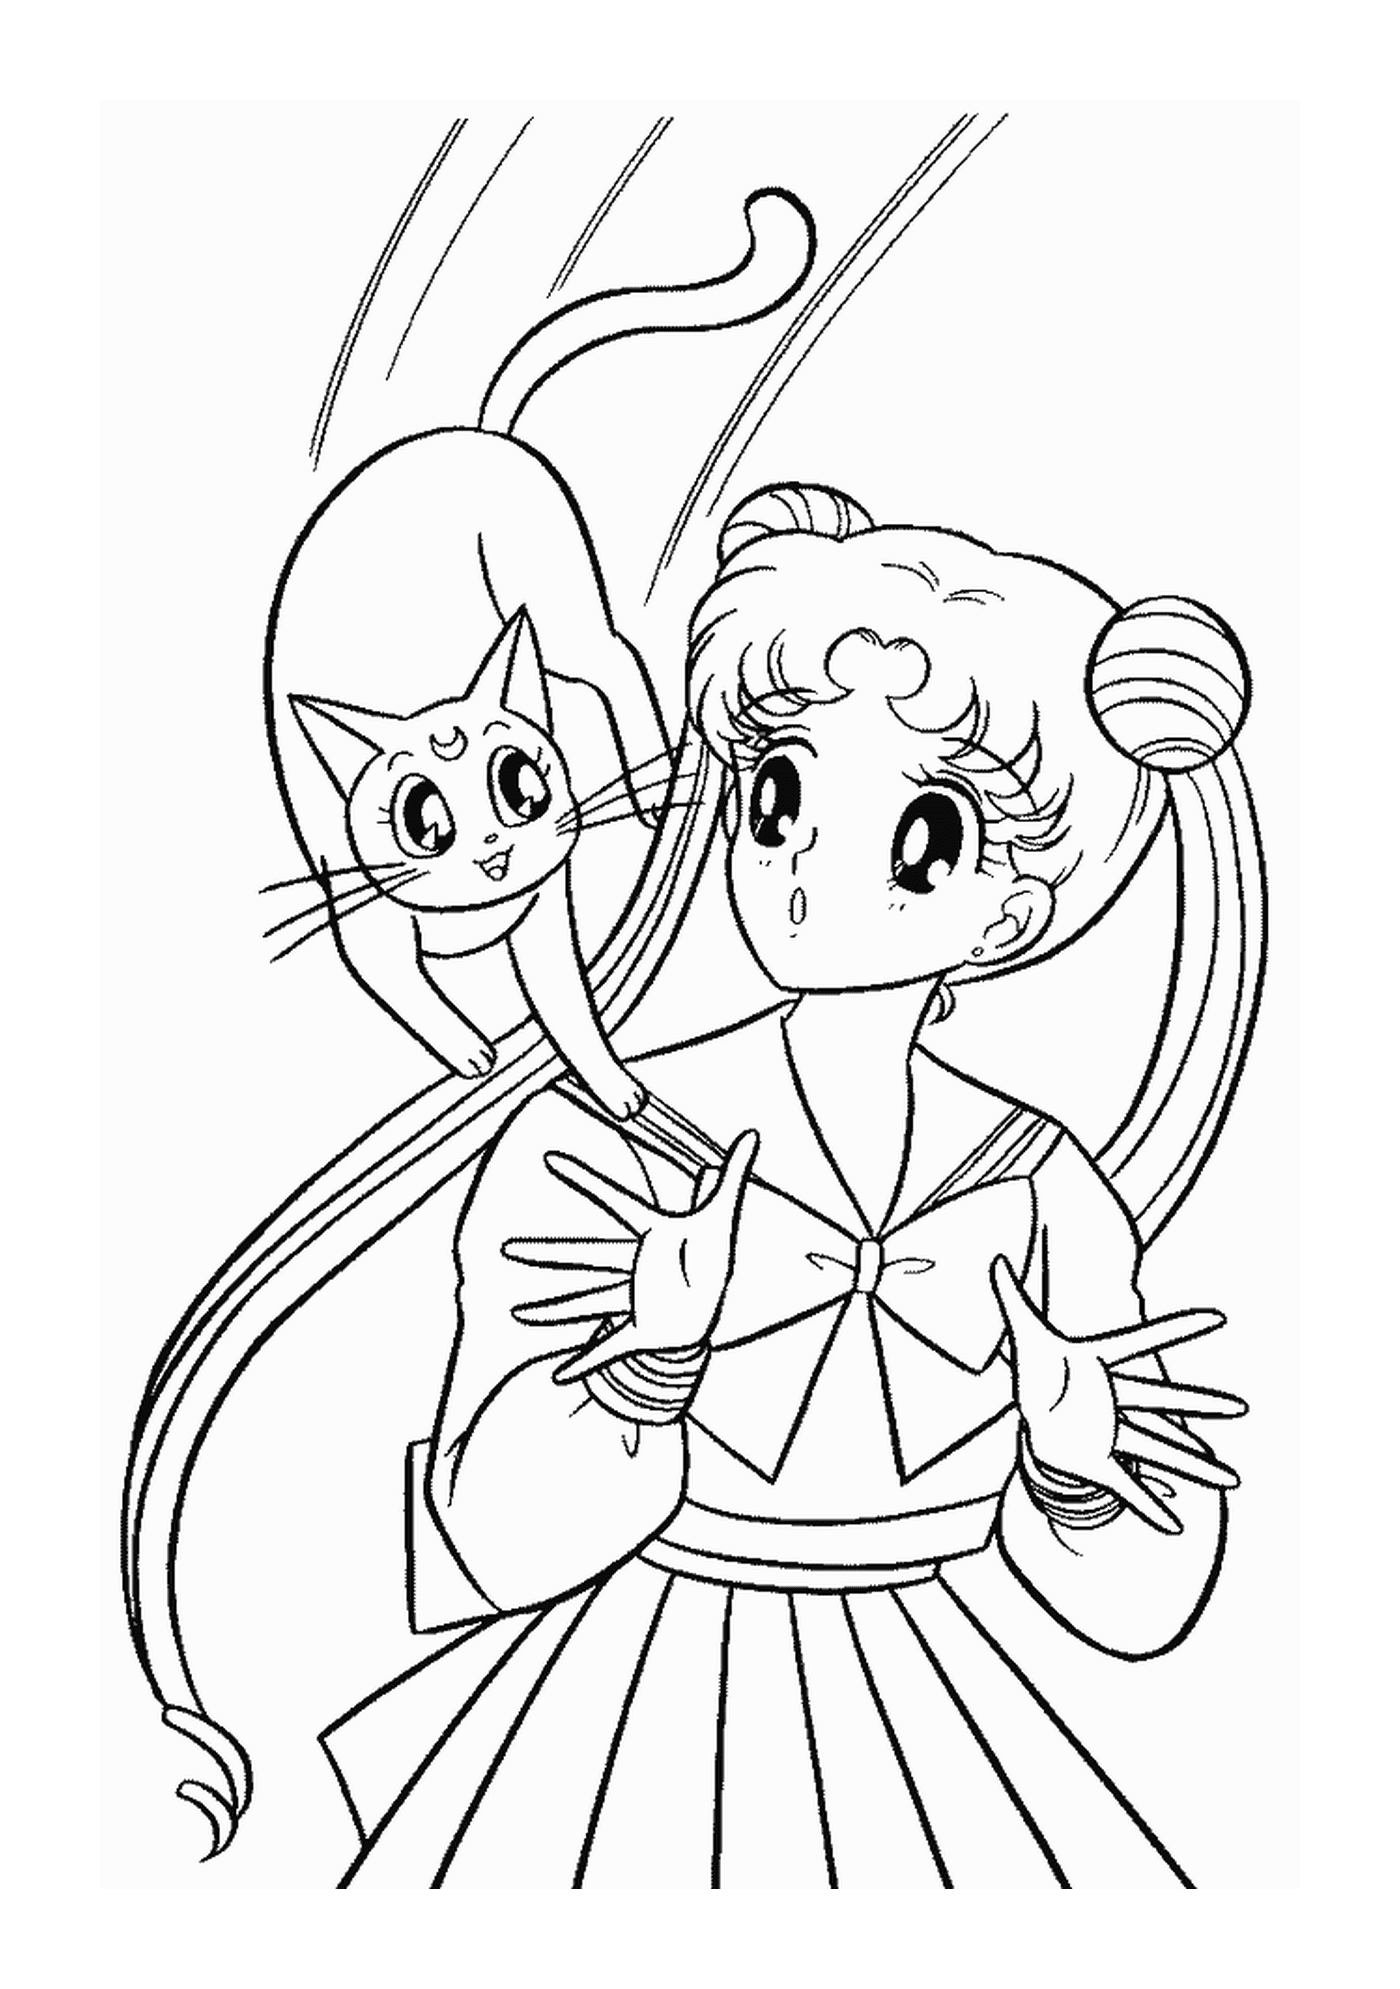  A character from Sailor Moon and a cat 